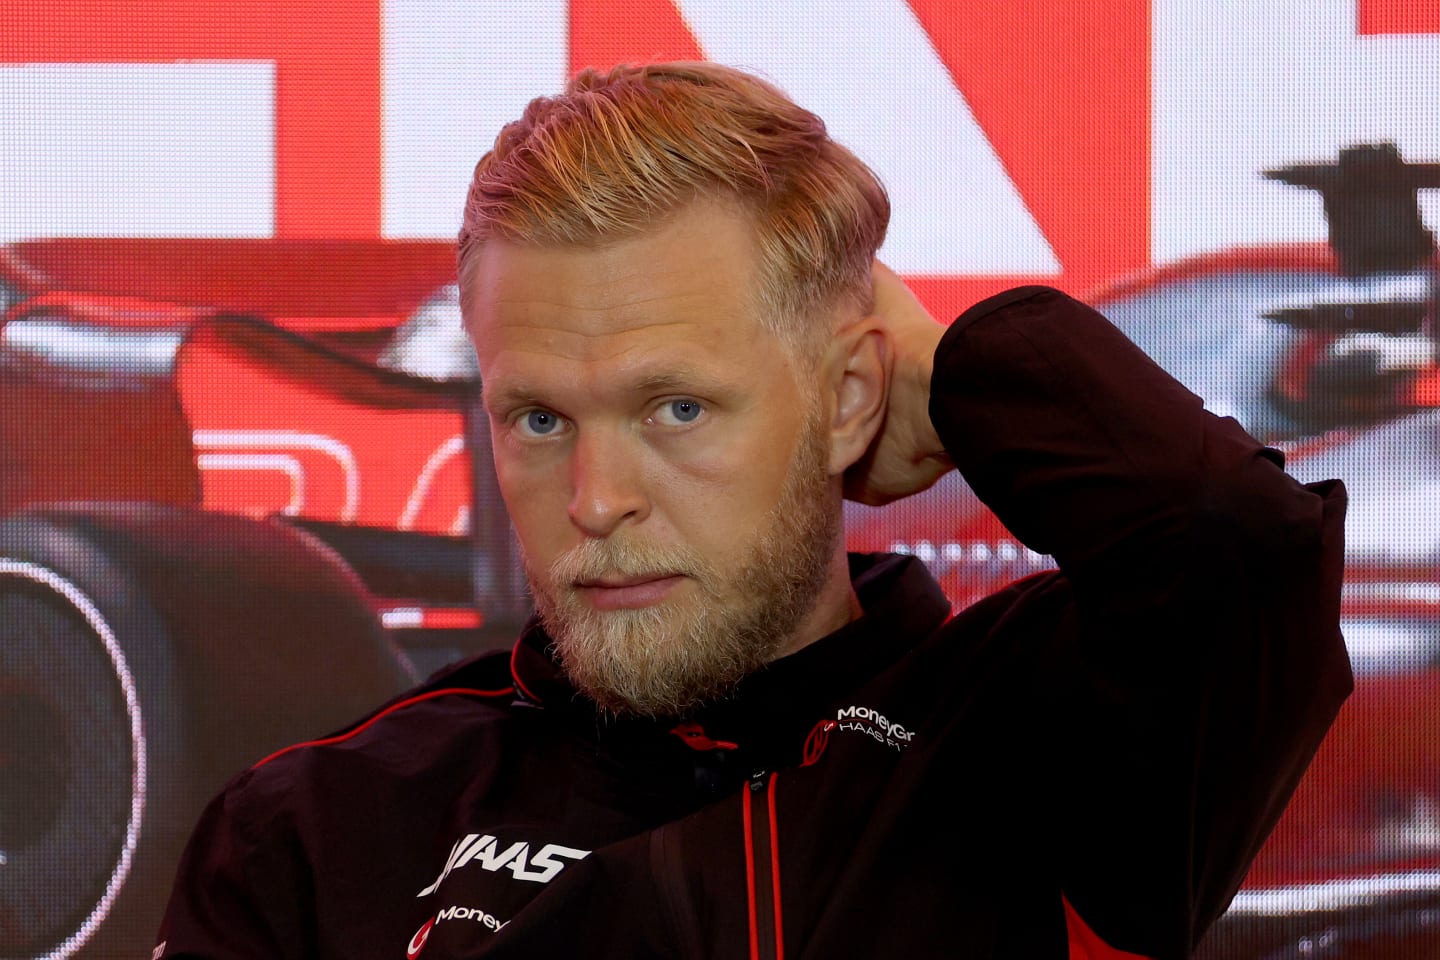 ZANDVOORT, NETHERLANDS - AUGUST 24: Kevin Magnussen of Denmark and Haas F1 attends the Drivers Press Conference during previews ahead of the F1 Grand Prix of The Netherlands at Circuit Zandvoort on August 24, 2023 in Zandvoort, Netherlands. (Photo by Dean Mouhtaropoulos/Getty Images)